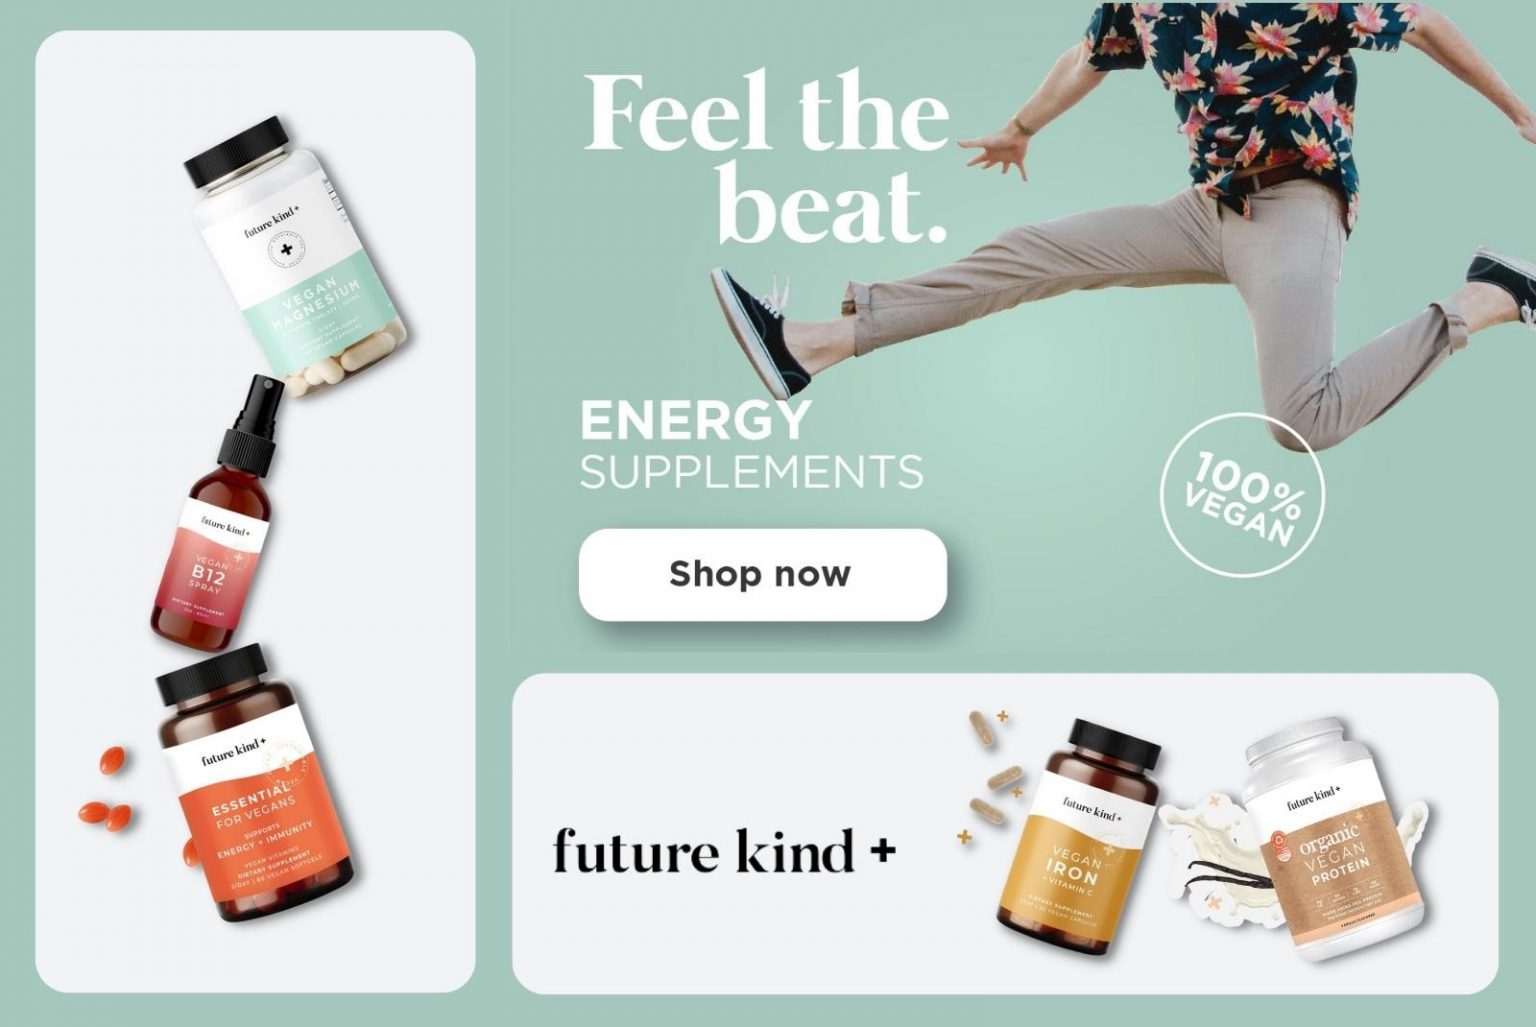 Future kind+ vegan energy supplements below to help power up your day!